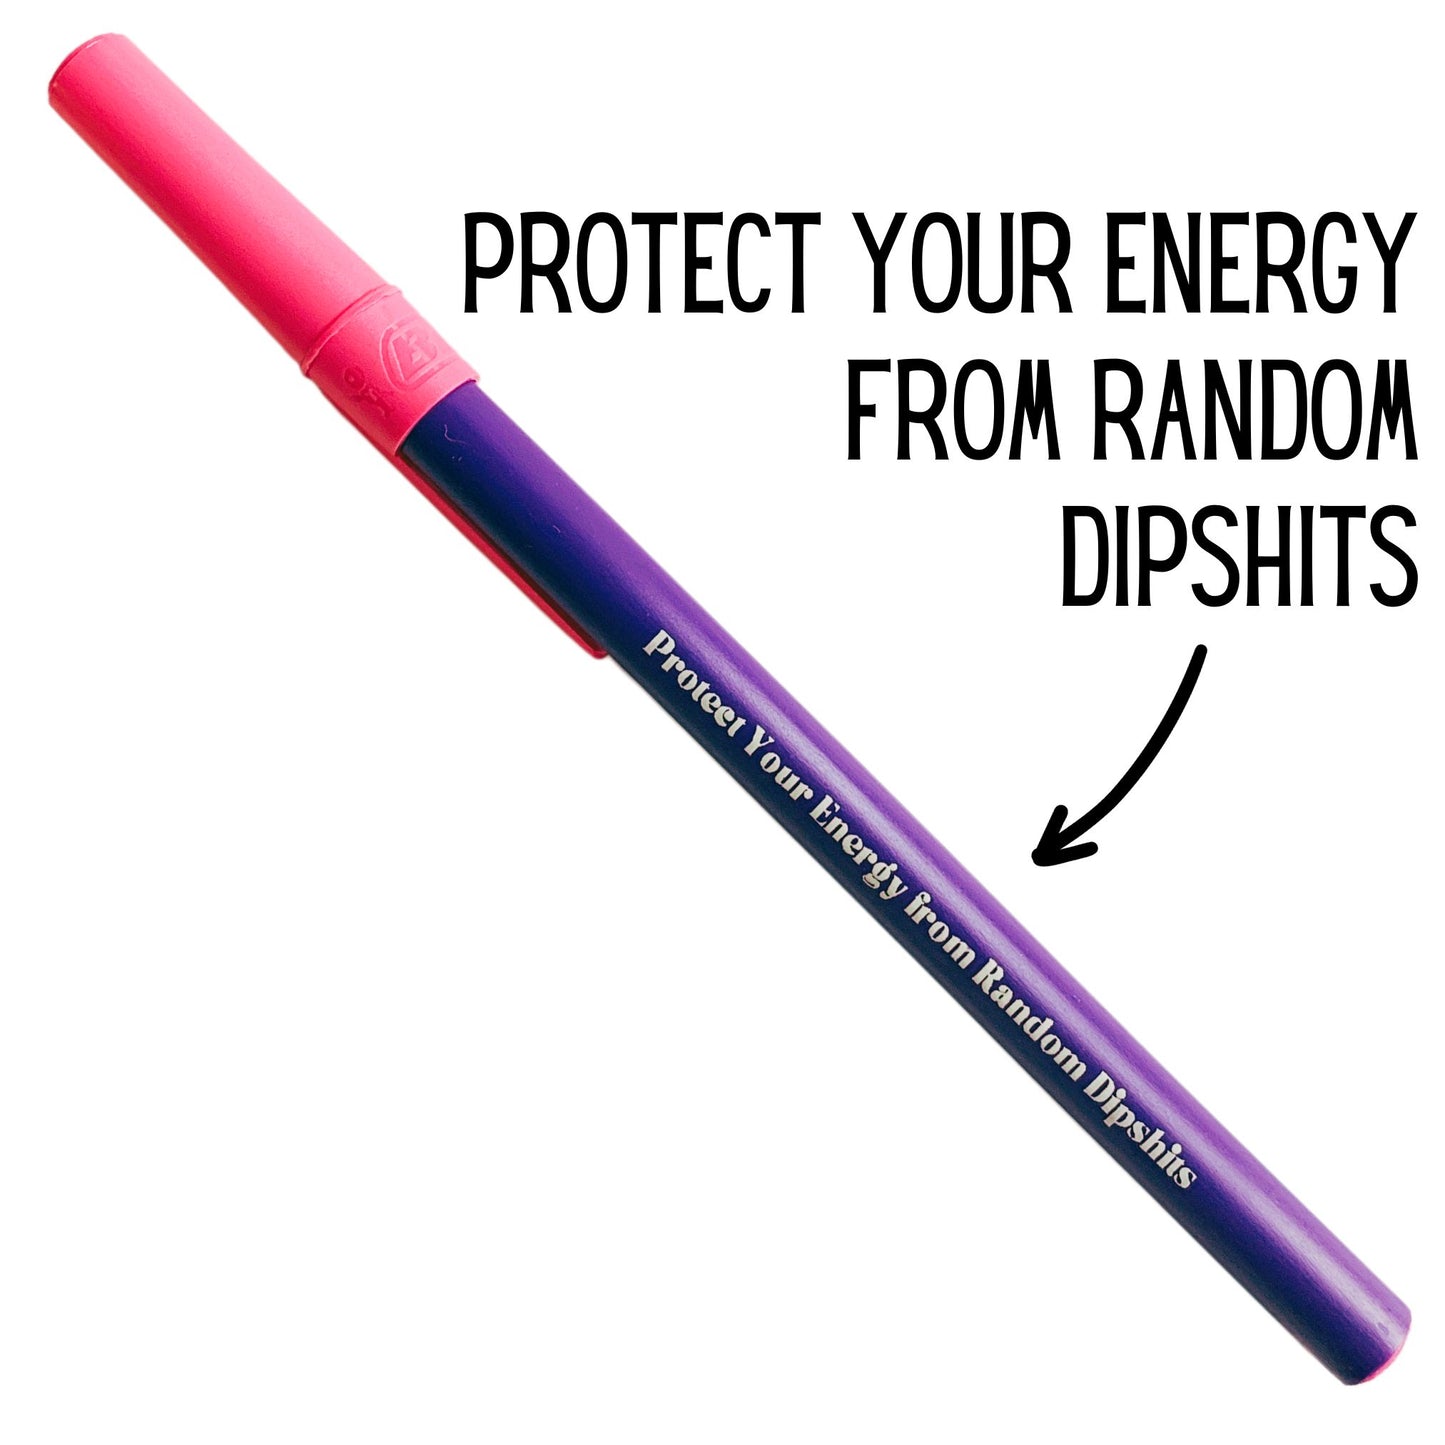 Protect Your Energy From Random Dipshits Ballpoint Pen in Violet | Gen Z Aesthetic Blue Ink